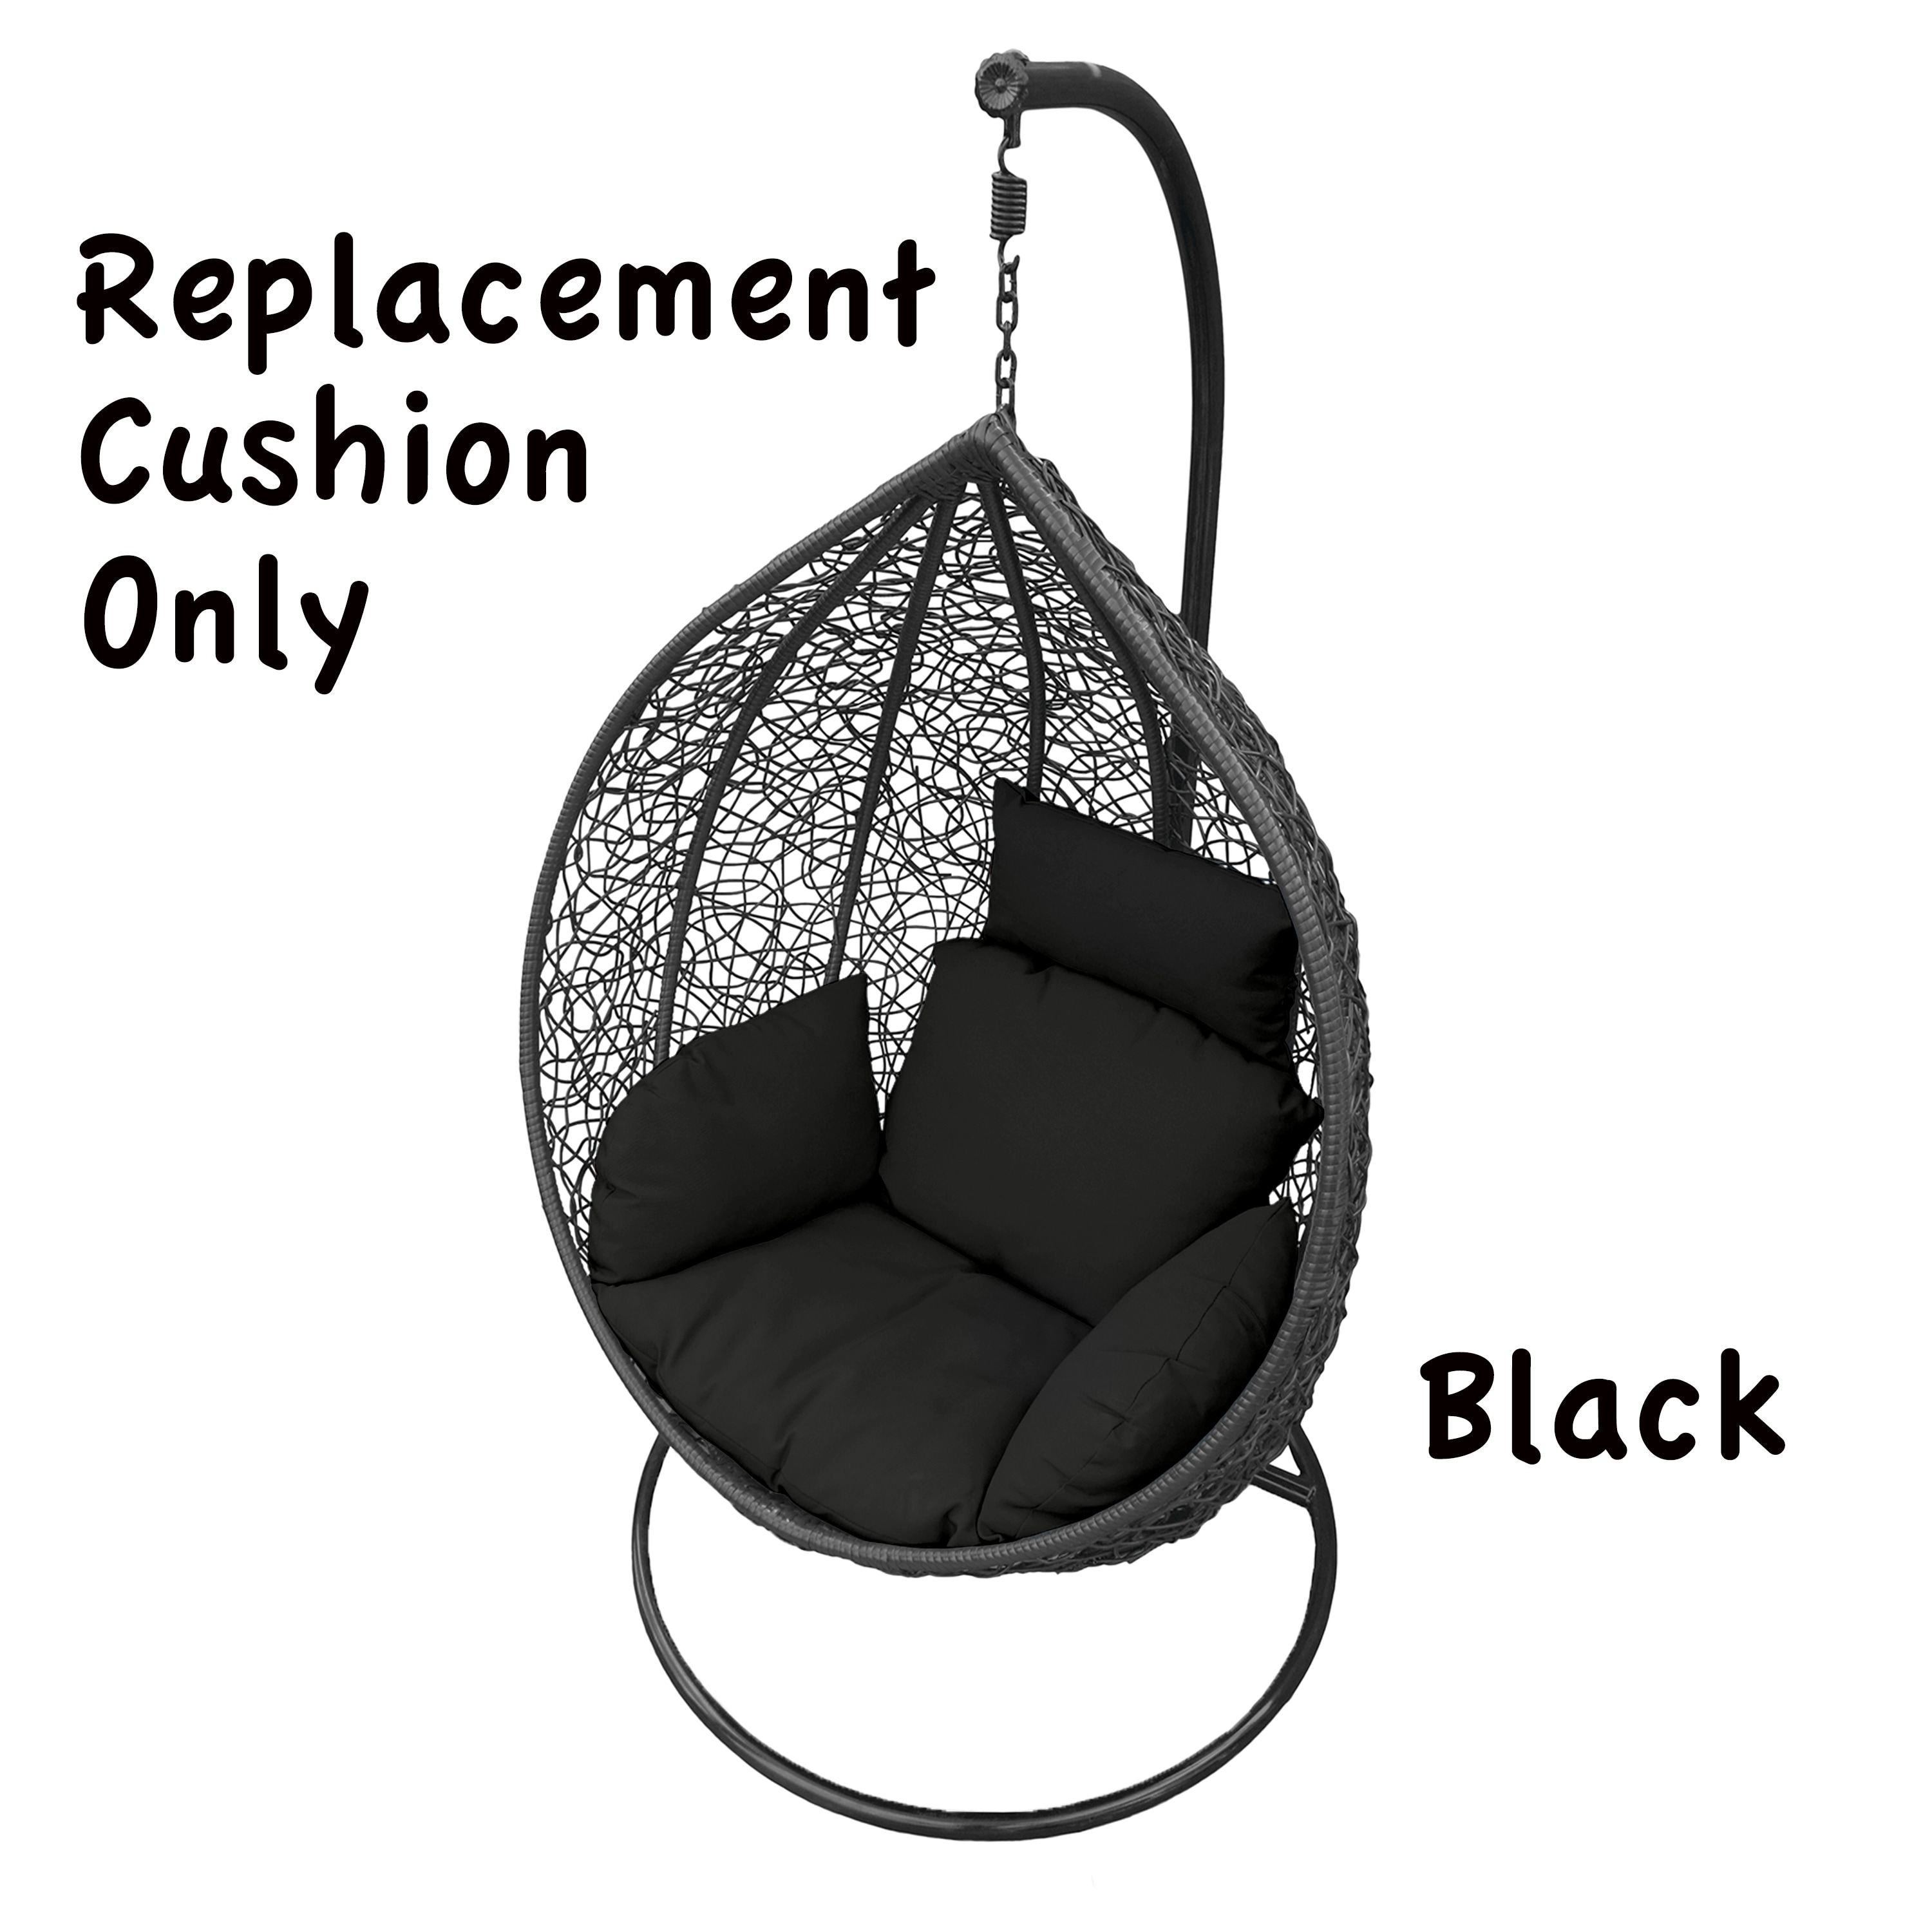 Joita Luxury Ottertex Replacement Cushion For Indoor Outdoor Egg Hanging Cocoon Papasan Chair Overstock 33802723